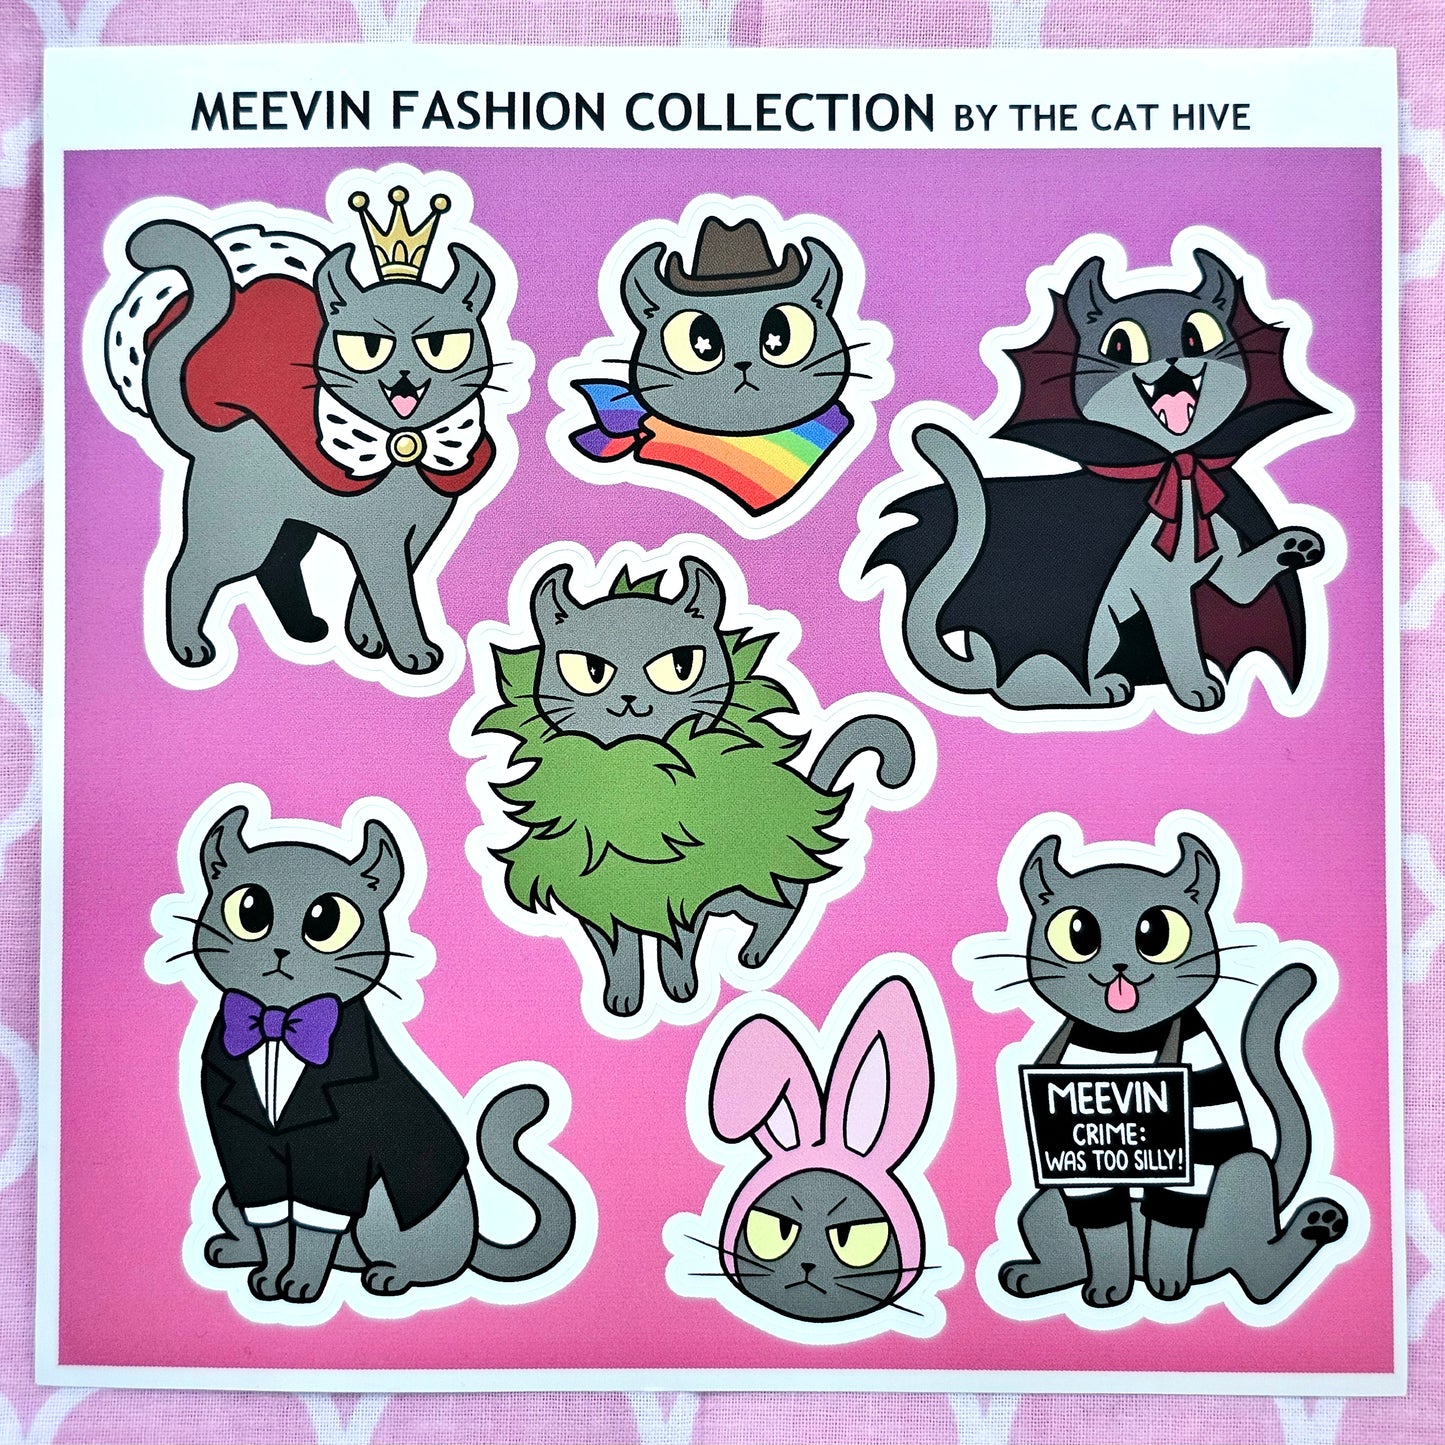 Meevin & Meatball Pin and Sticker Collection